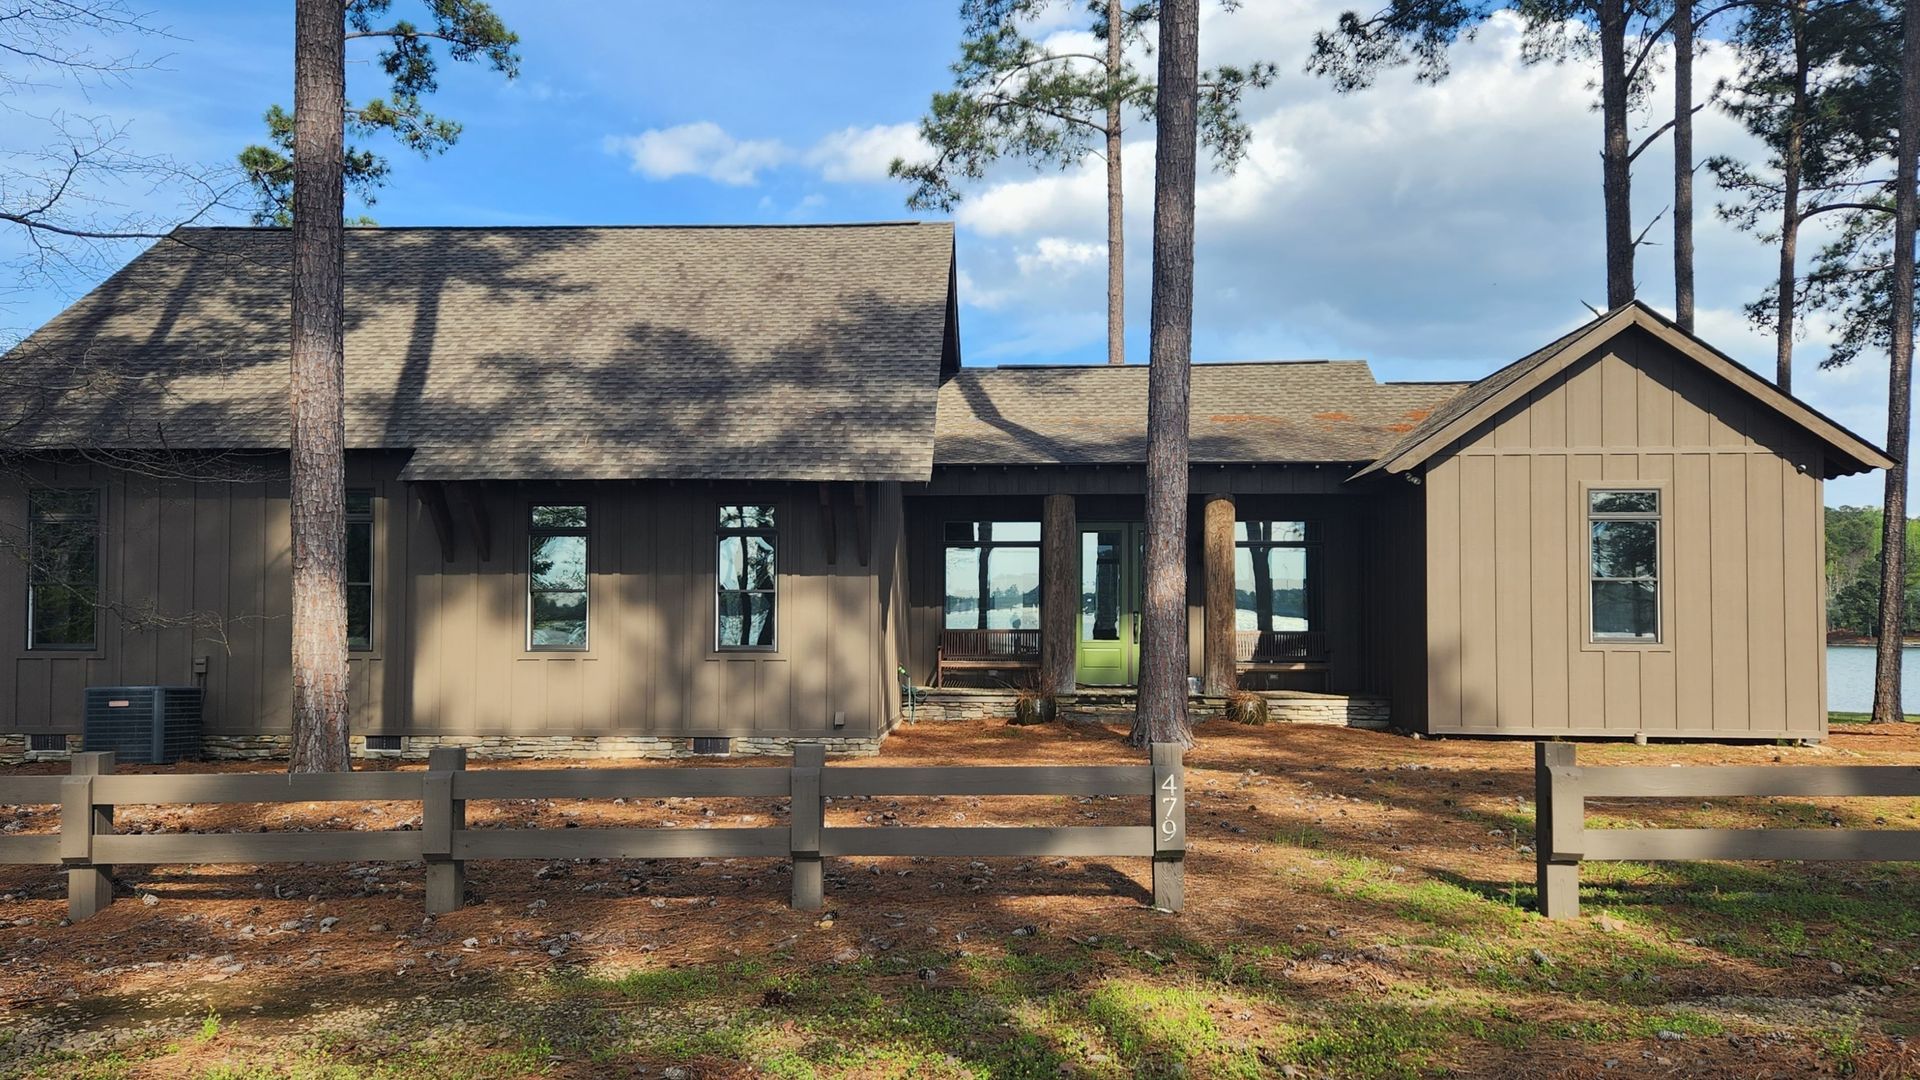 residential tinting Lake Martin - SPF Dimmed Crystal lake home tint upgrades appeal both inside and out. Alexander City, AL